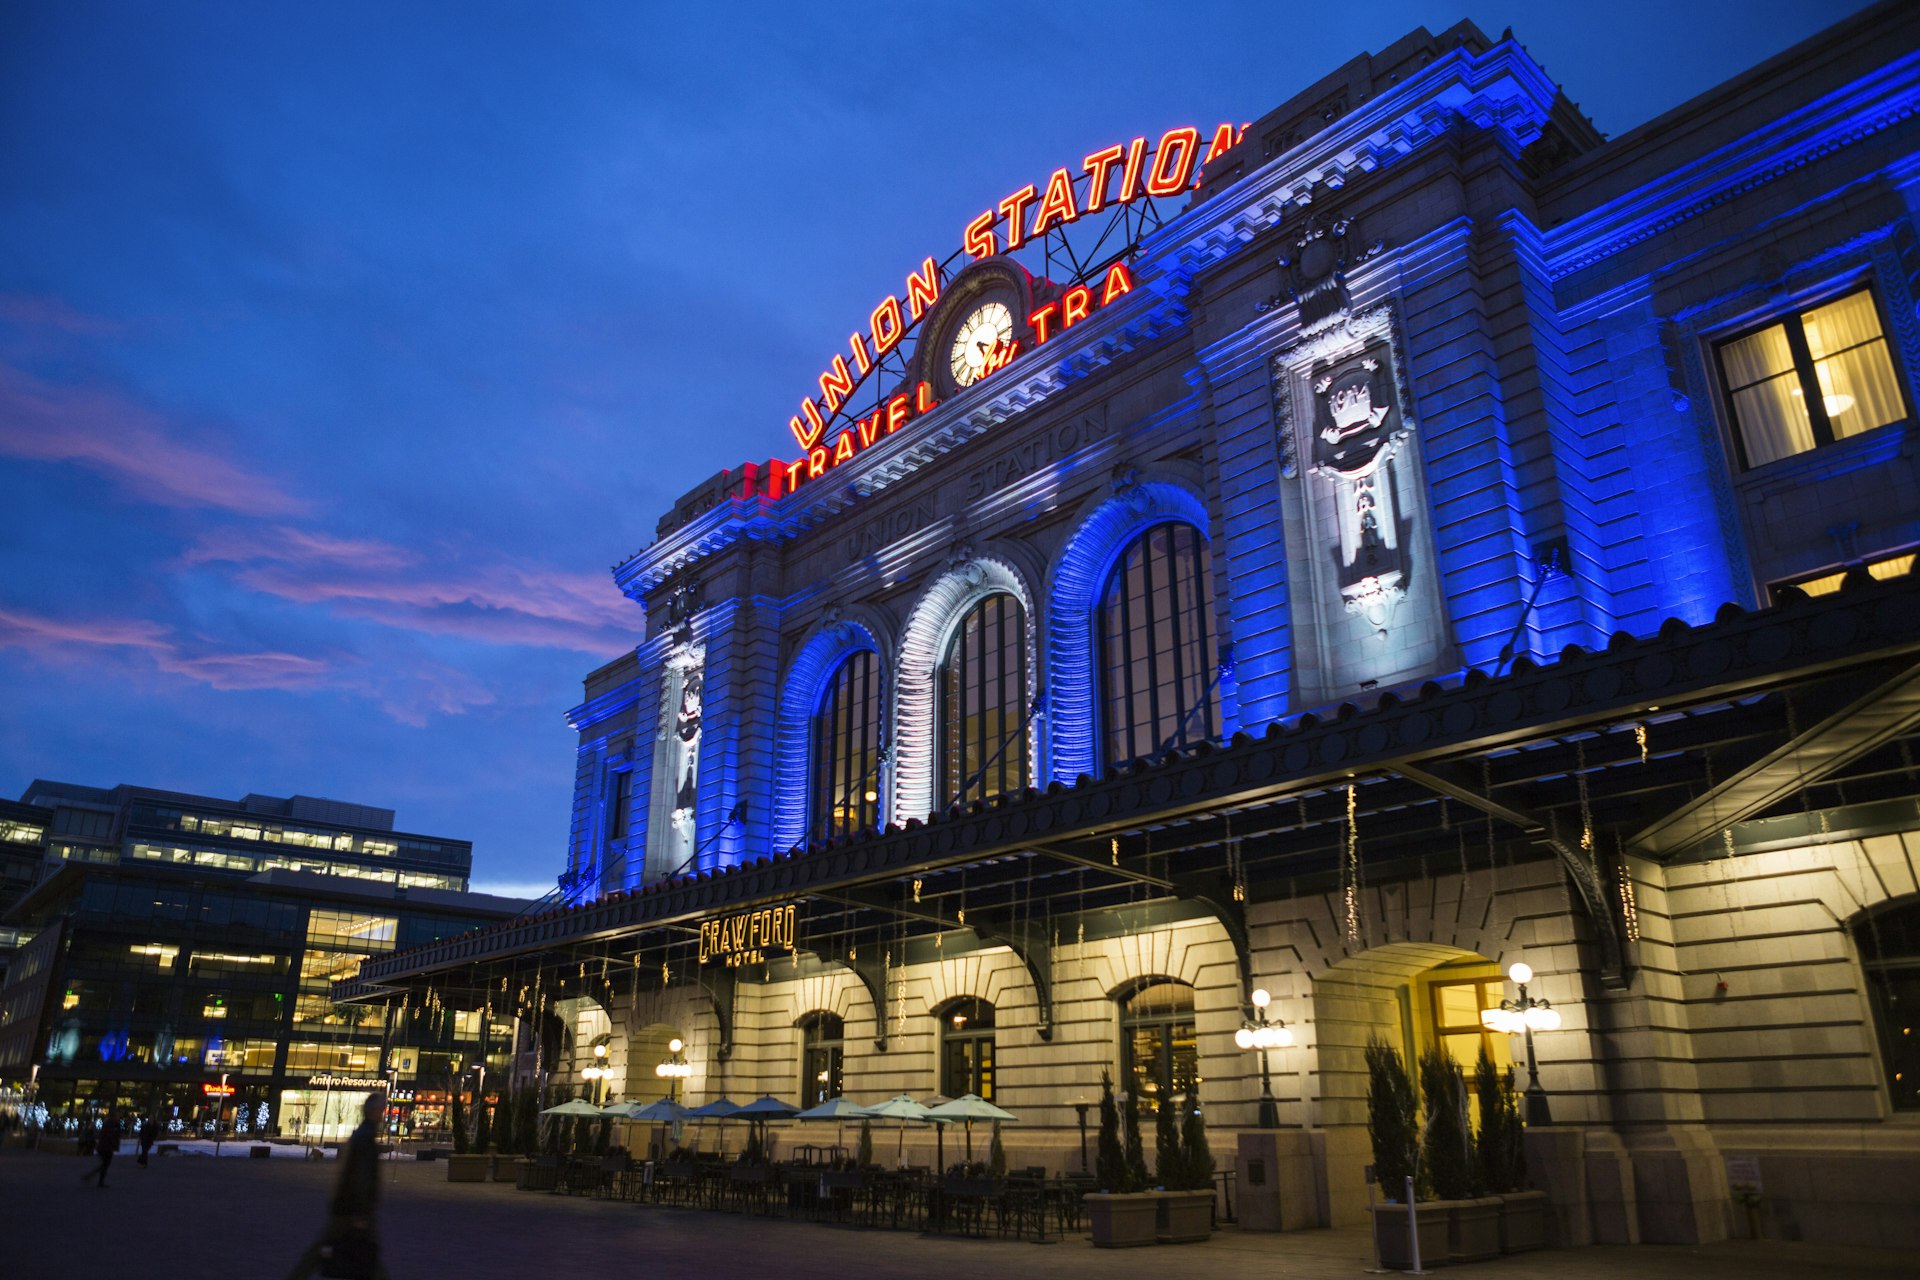 Union Station and Crawford Hotel in Denver Colorado